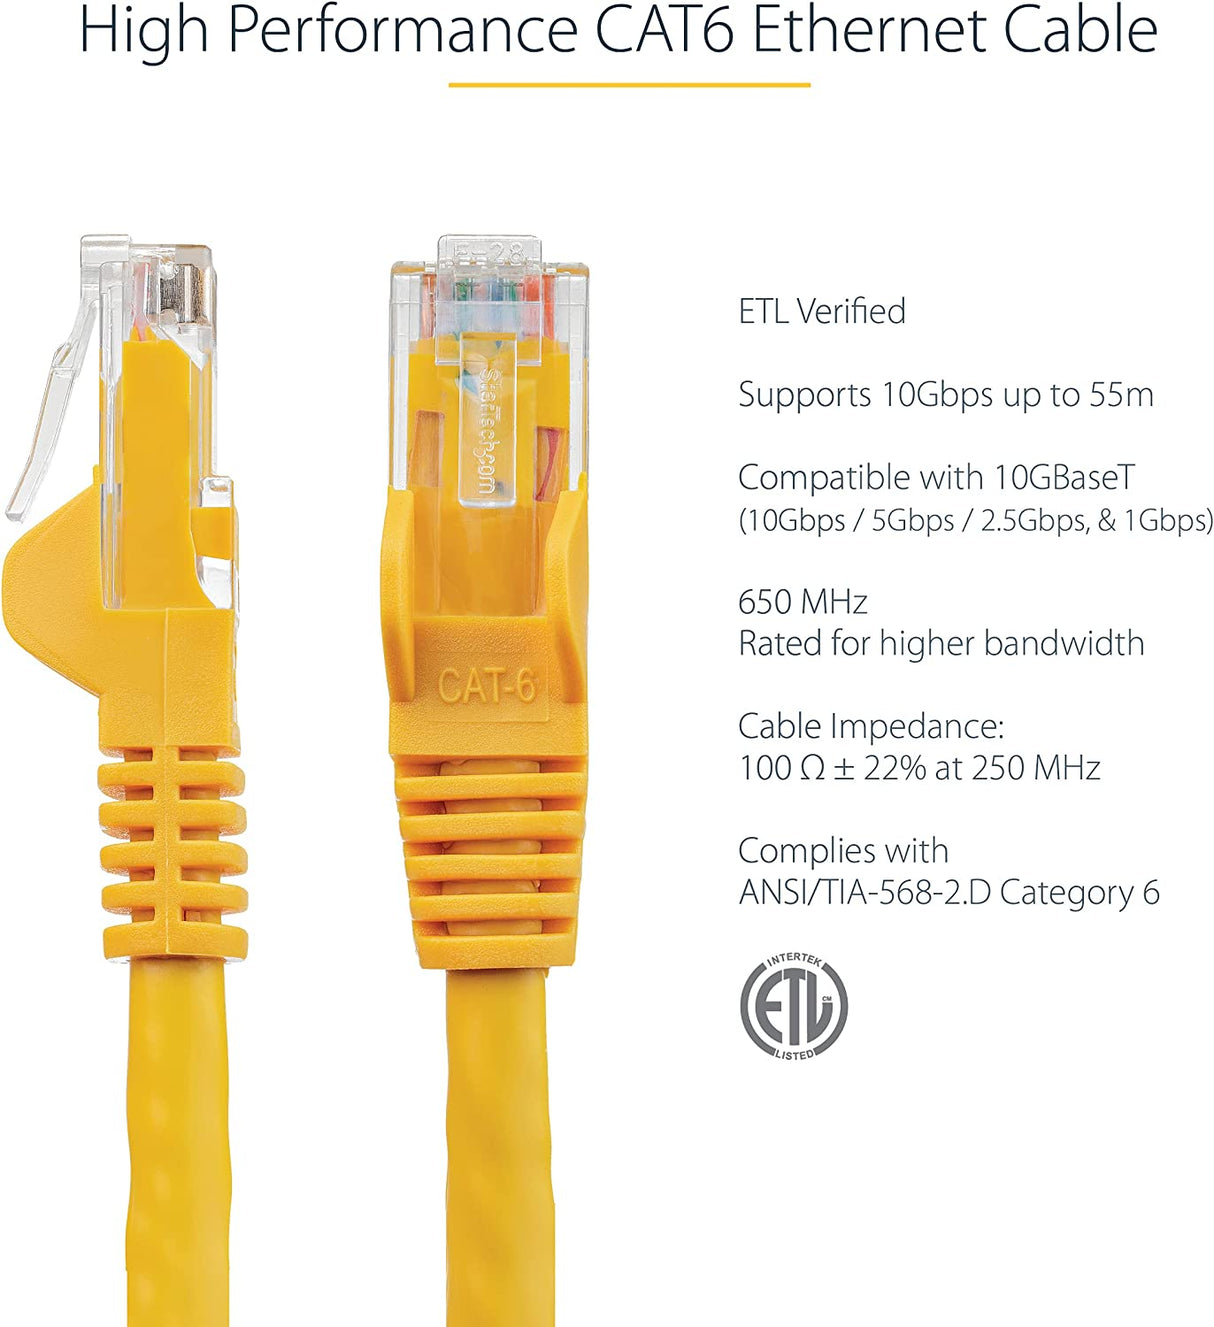 StarTech.com 3ft CAT6 Ethernet Cable - Yellow CAT 6 Gigabit Ethernet Wire -650MHz 100W PoE RJ45 UTP Network/Patch Cord Snagless w/Strain Relief Fluke Tested/Wiring is UL Certified/TIA (N6PATCH3YL) Yellow 3 ft / 0.9 m 1 Pack